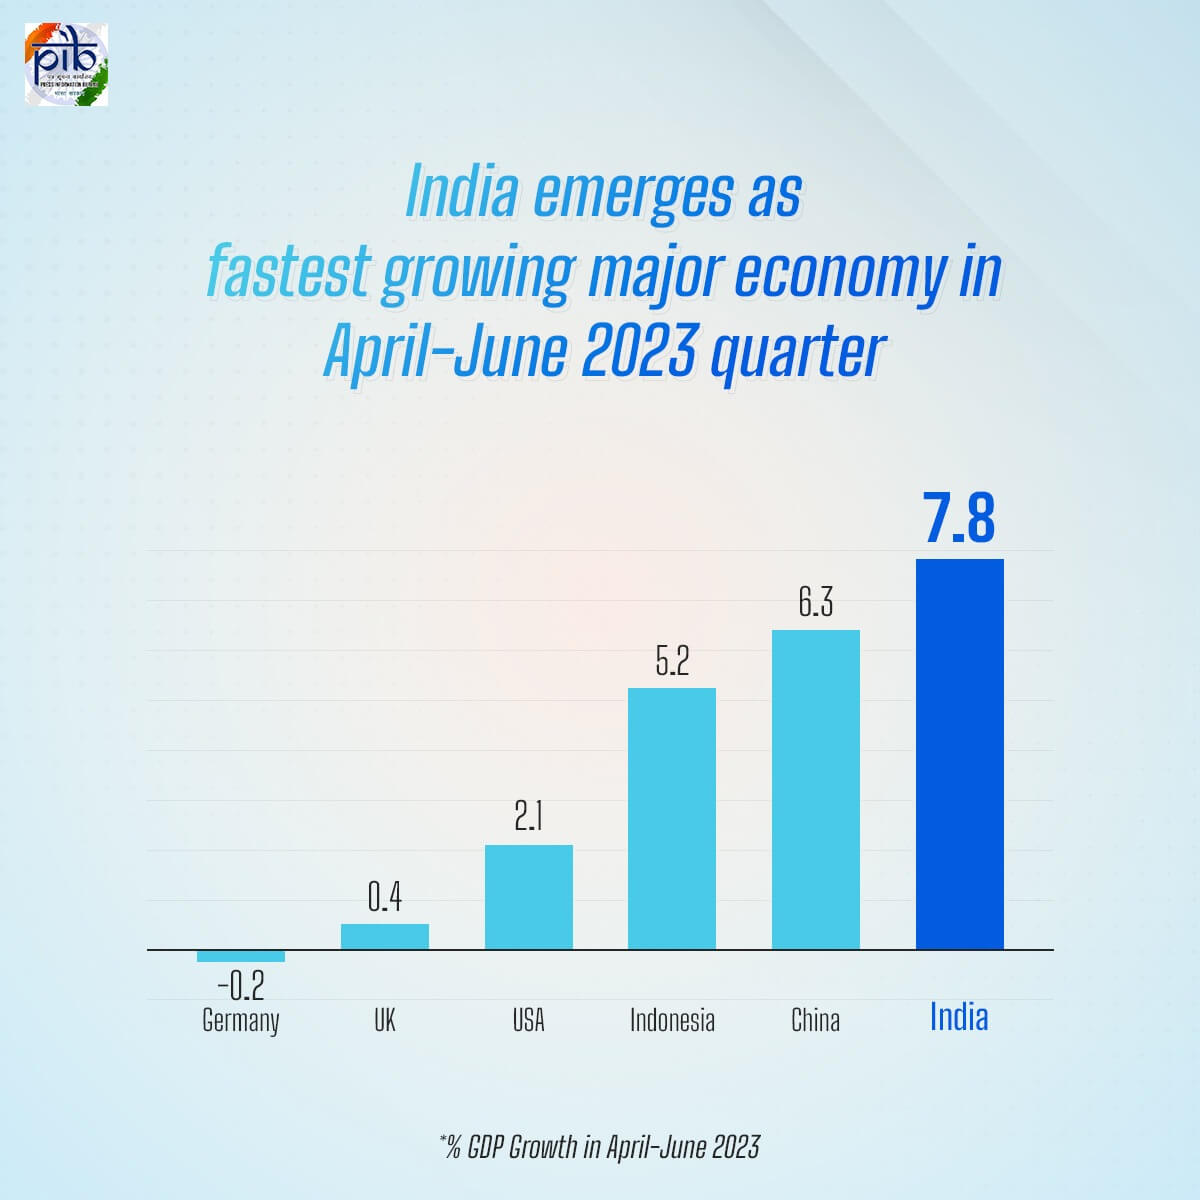 India emerges as the fastest-growing major economy in the April-June 2023 quarter.

At 7.8% year on year, India’s growth rate towers above the growth rate in several other leading economies.